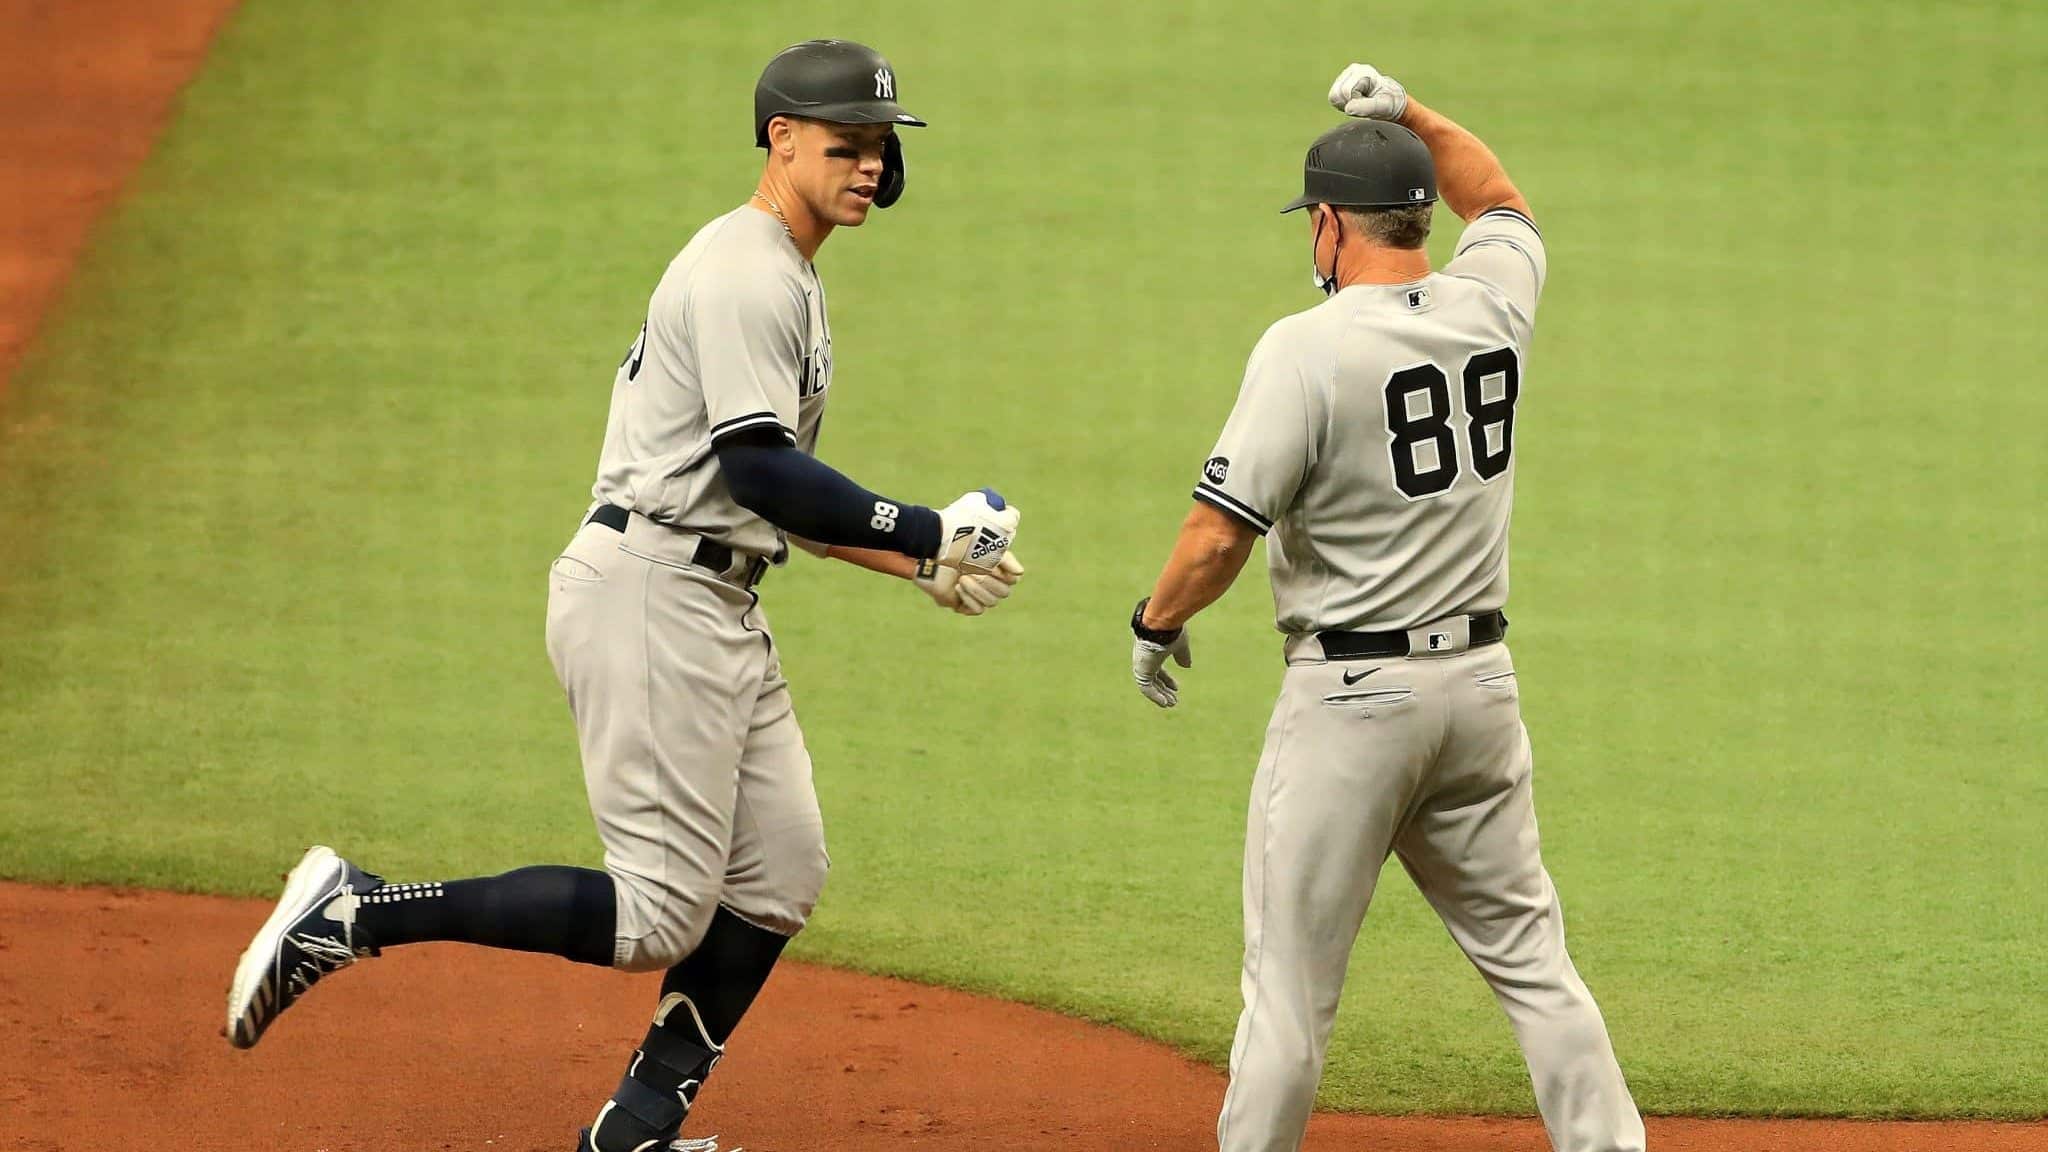 ST PETERSBURG, FLORIDA - AUGUST 08: Aaron Judge #99 of the New York Yankees hits a solo home run in the sixth inning during Game 1 of a doubleheader against the Tampa Bay Rays at Tropicana Field on August 08, 2020 in St Petersburg, Florida.